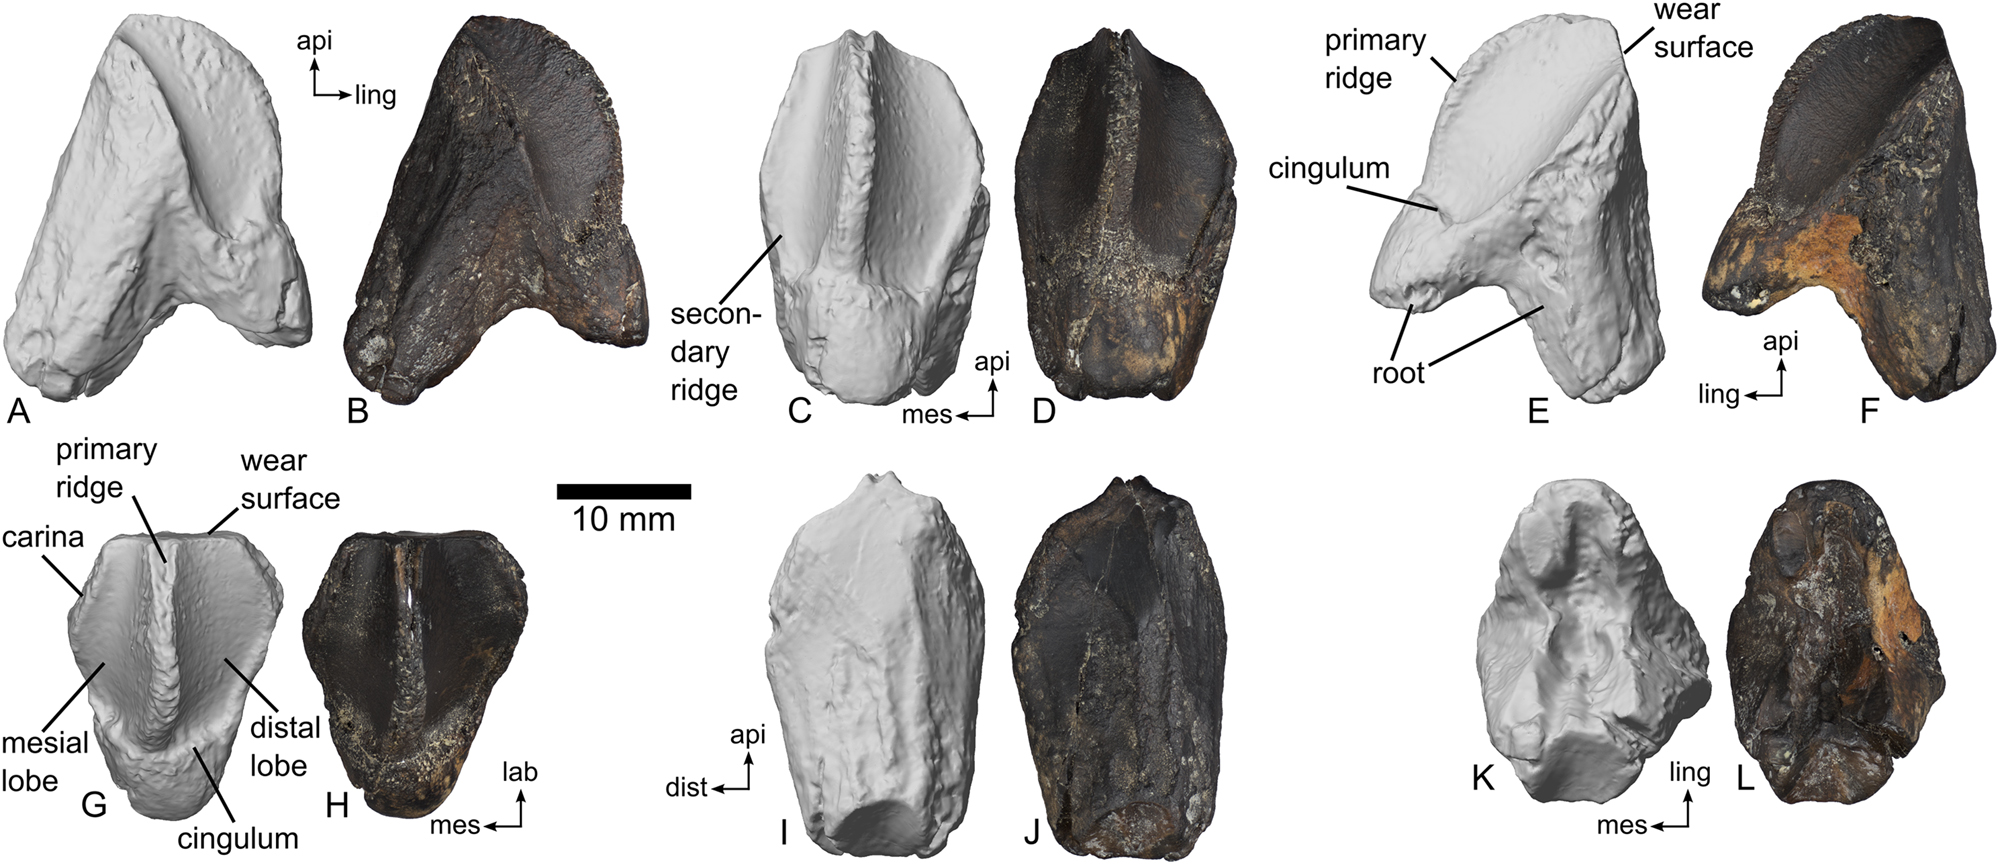 Six views of a single tooth of a ceratopsid dinosaur, a type of plant-eating horned dinosaur, from the Cretaceous of Mississippi. Each view is shown as a color photo and a grayscale model.